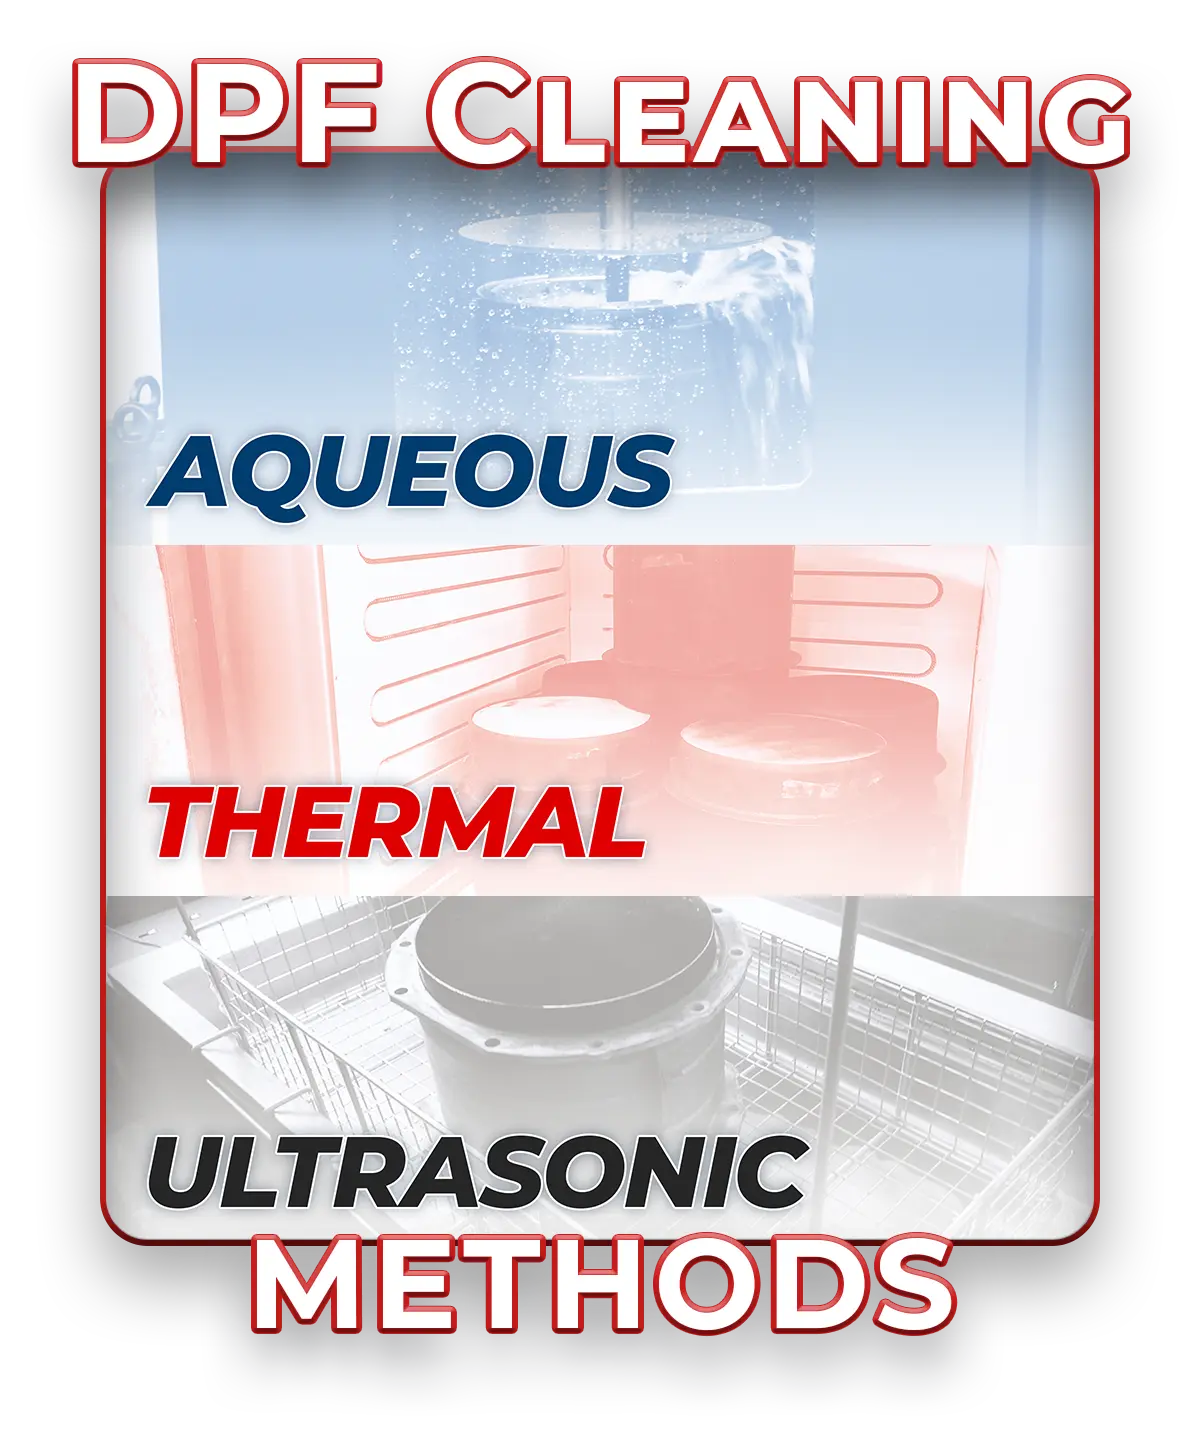 DPF Cleaning Methods